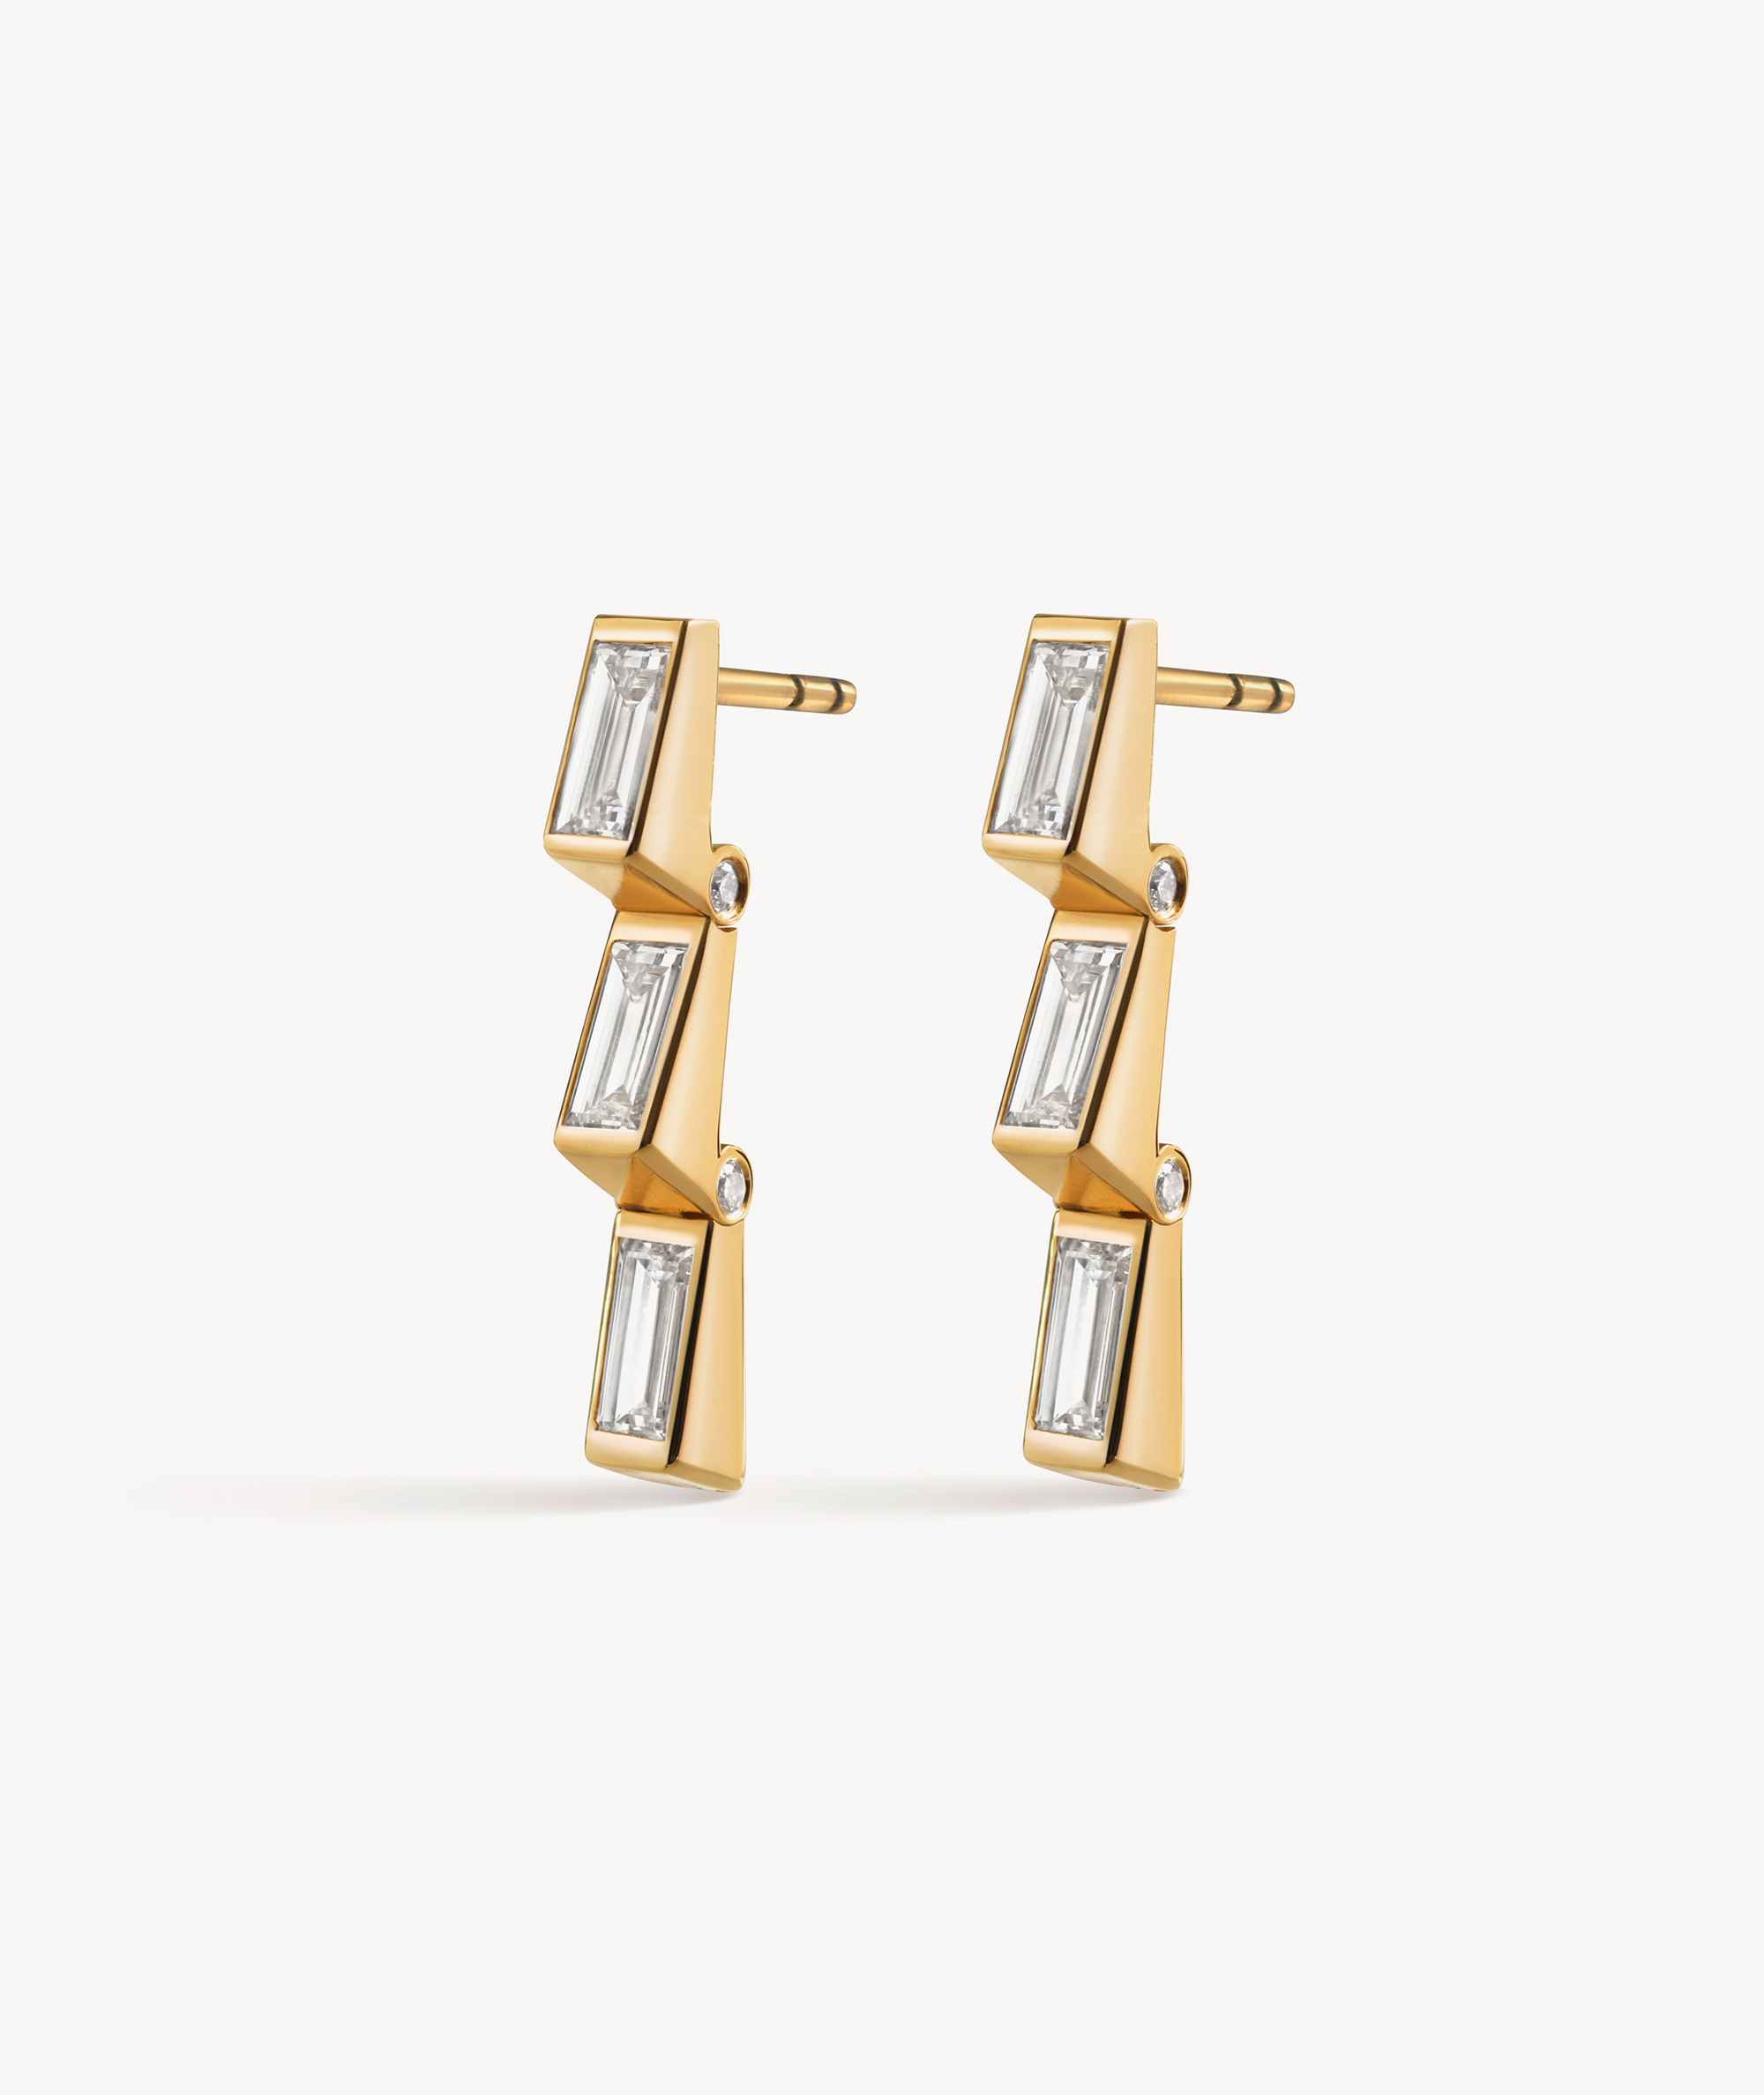 EREDE earrings in 18k recycled yellow gold and lab-grown diamonds.